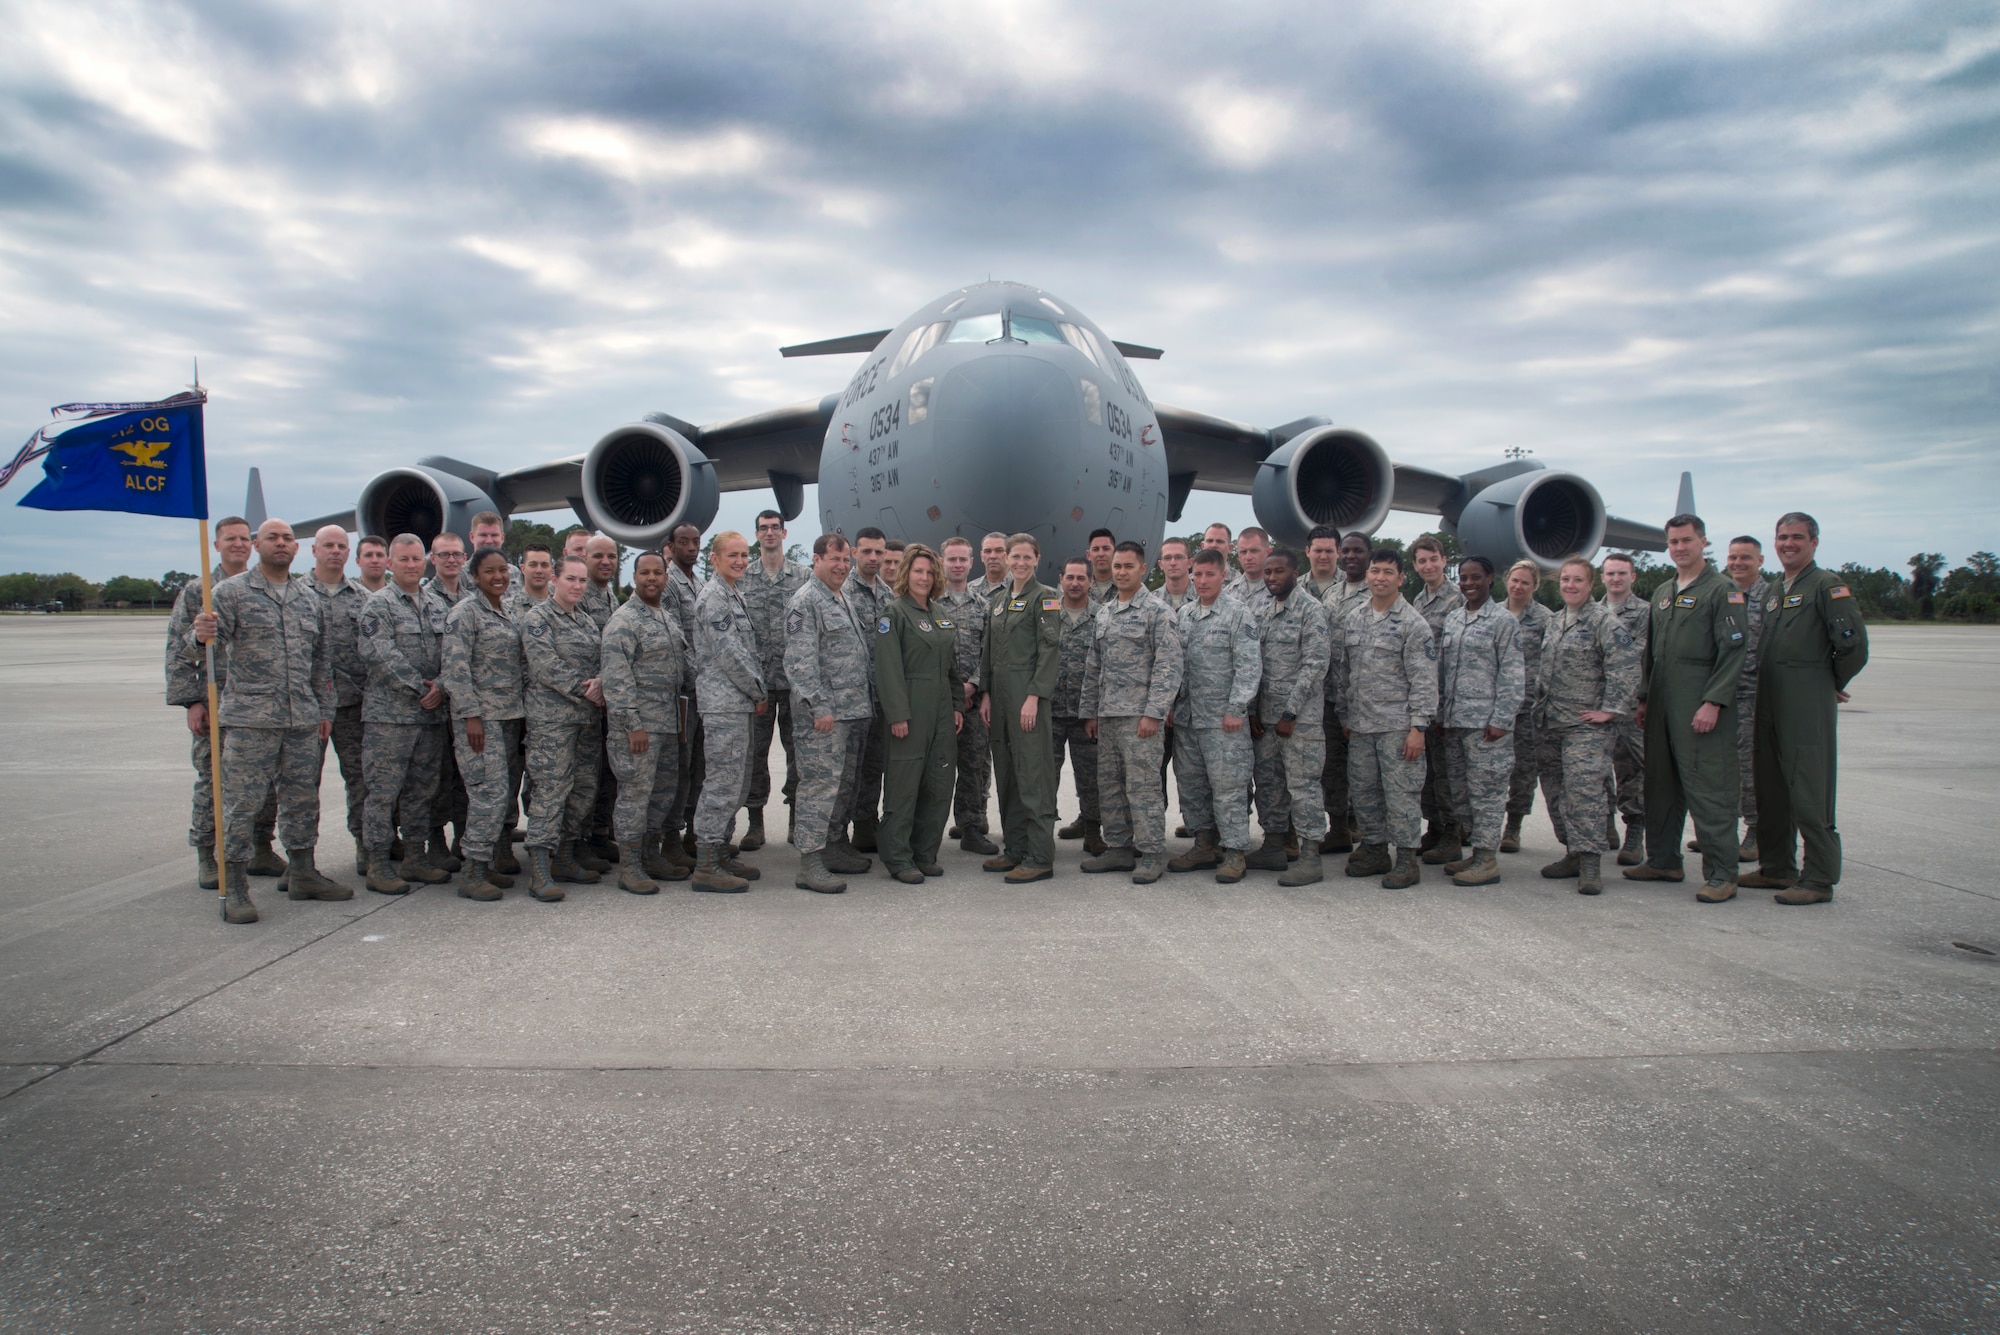 U.S. Air Force Airmen assigned to the 46th Aerial Port Squadron, 512th Contingency Response Squadron and 712th Aircraft Maintenance Squadron at Dover Air Force Base, Del., pause for a photo at MacDill Air Force Base, Fla., March 2, 2018.